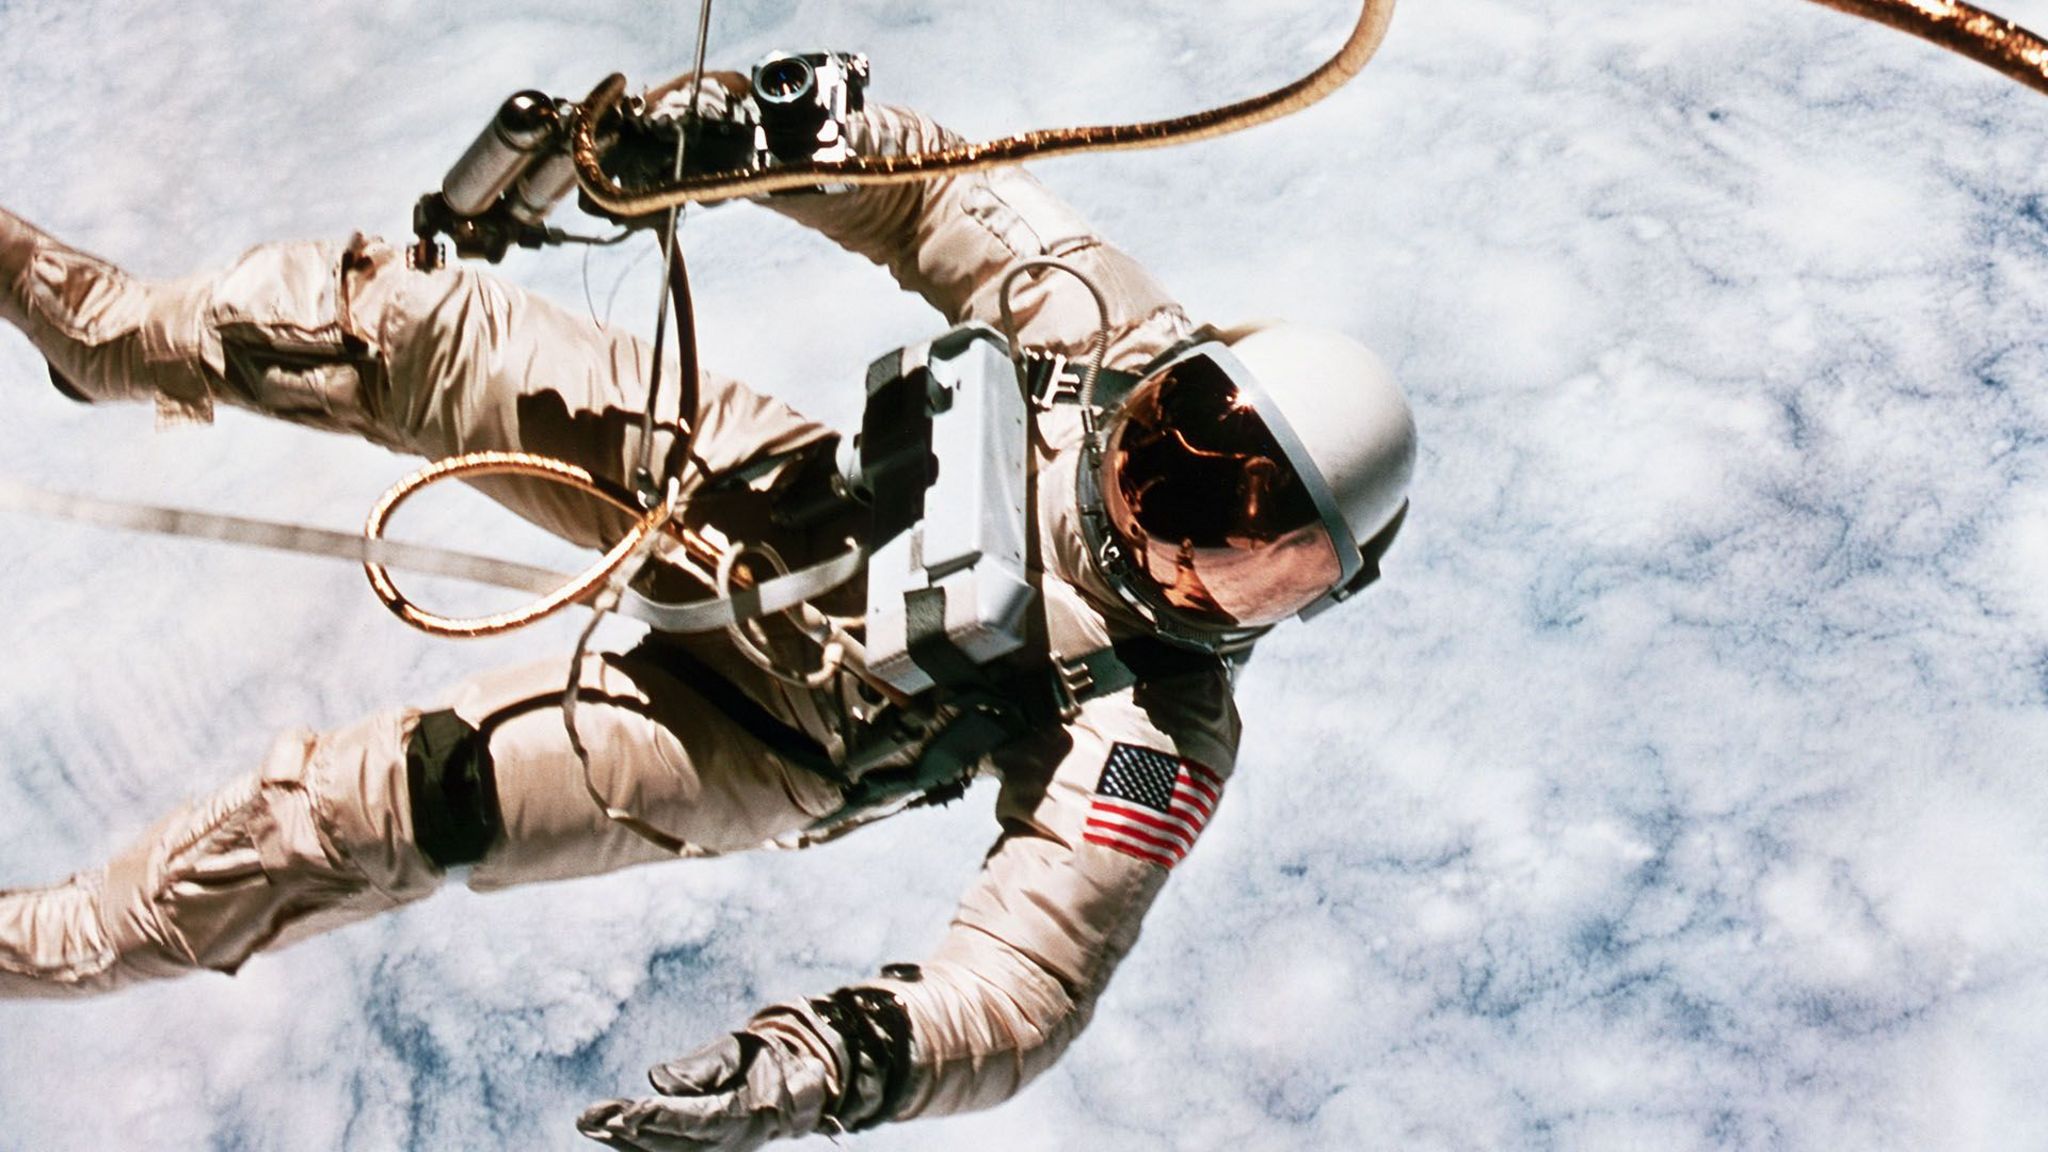 Ed White in his spacesuit performing a spacewalk above the clouds of the Earth